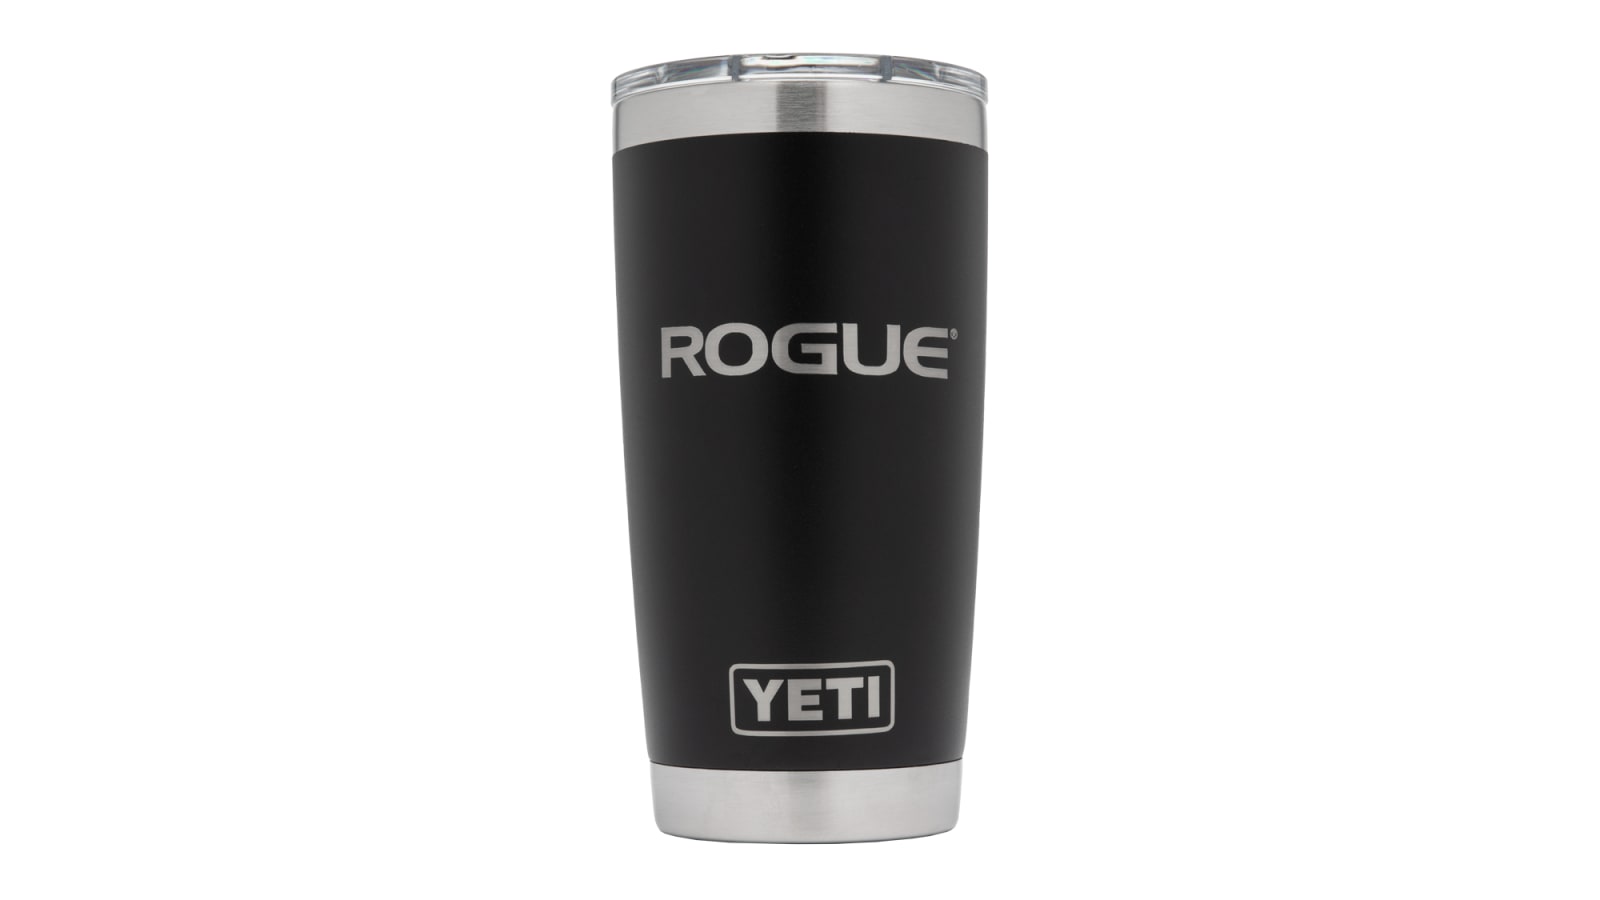 https://assets.roguefitness.com/f_auto,q_auto,c_limit,w_1600,b_rgb:ffffff/catalog/Gear%20and%20Accessories/Accessories/Shakers%20and%20Bottles/YT0042/YT0042-WEB1_qhffzt.png